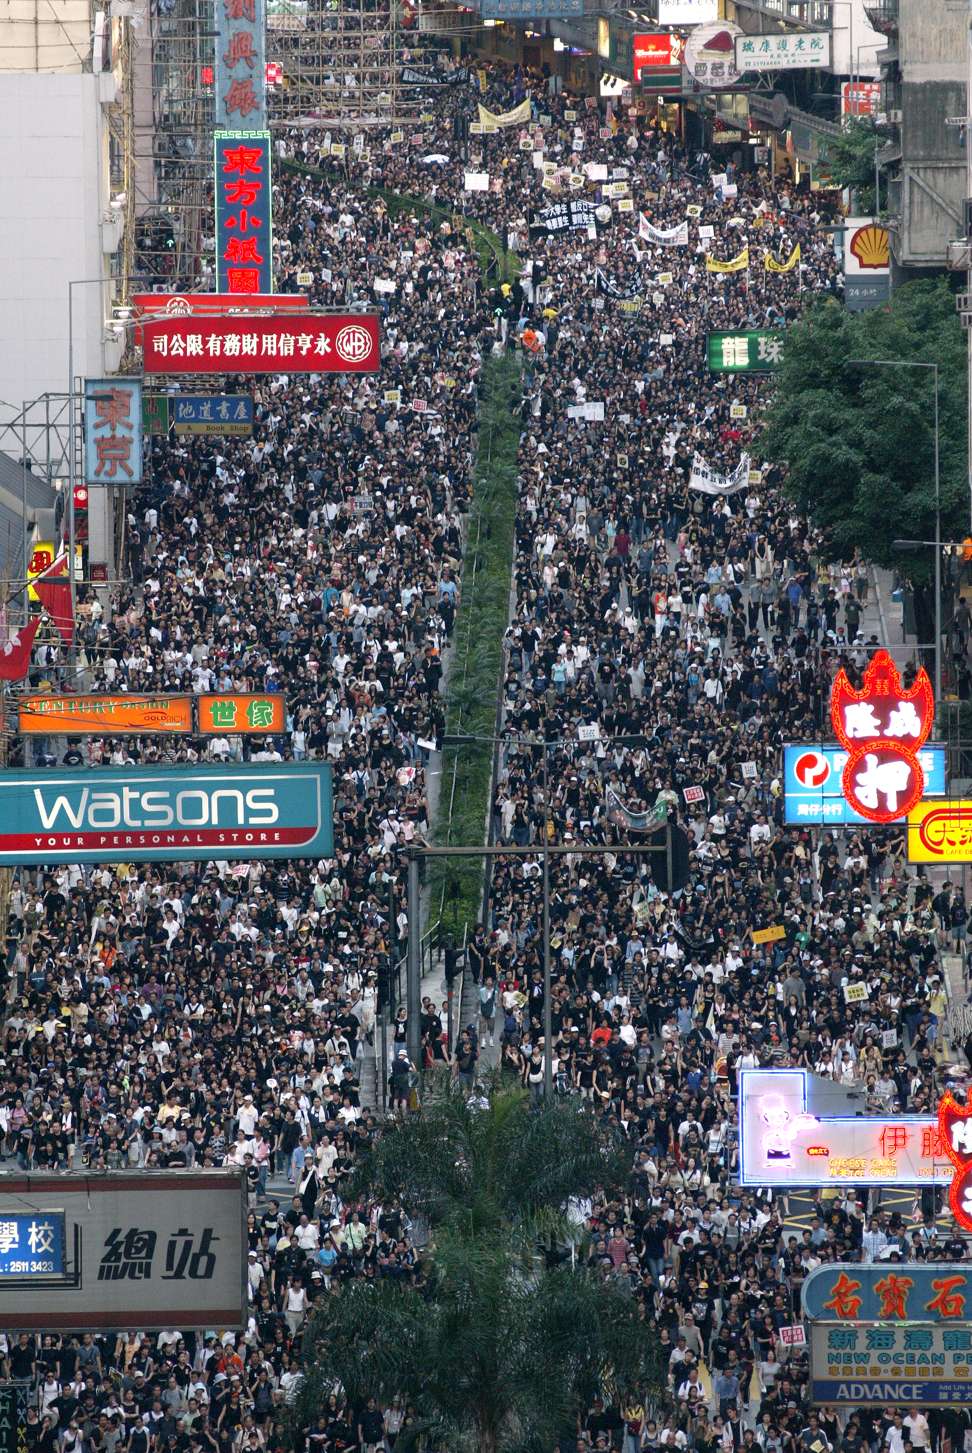 Thousands of Hong Kong residents marched from Victoria Park to Central Government Offices on July 1, 2003, to protest against Article 23. Photo: Martin Chan